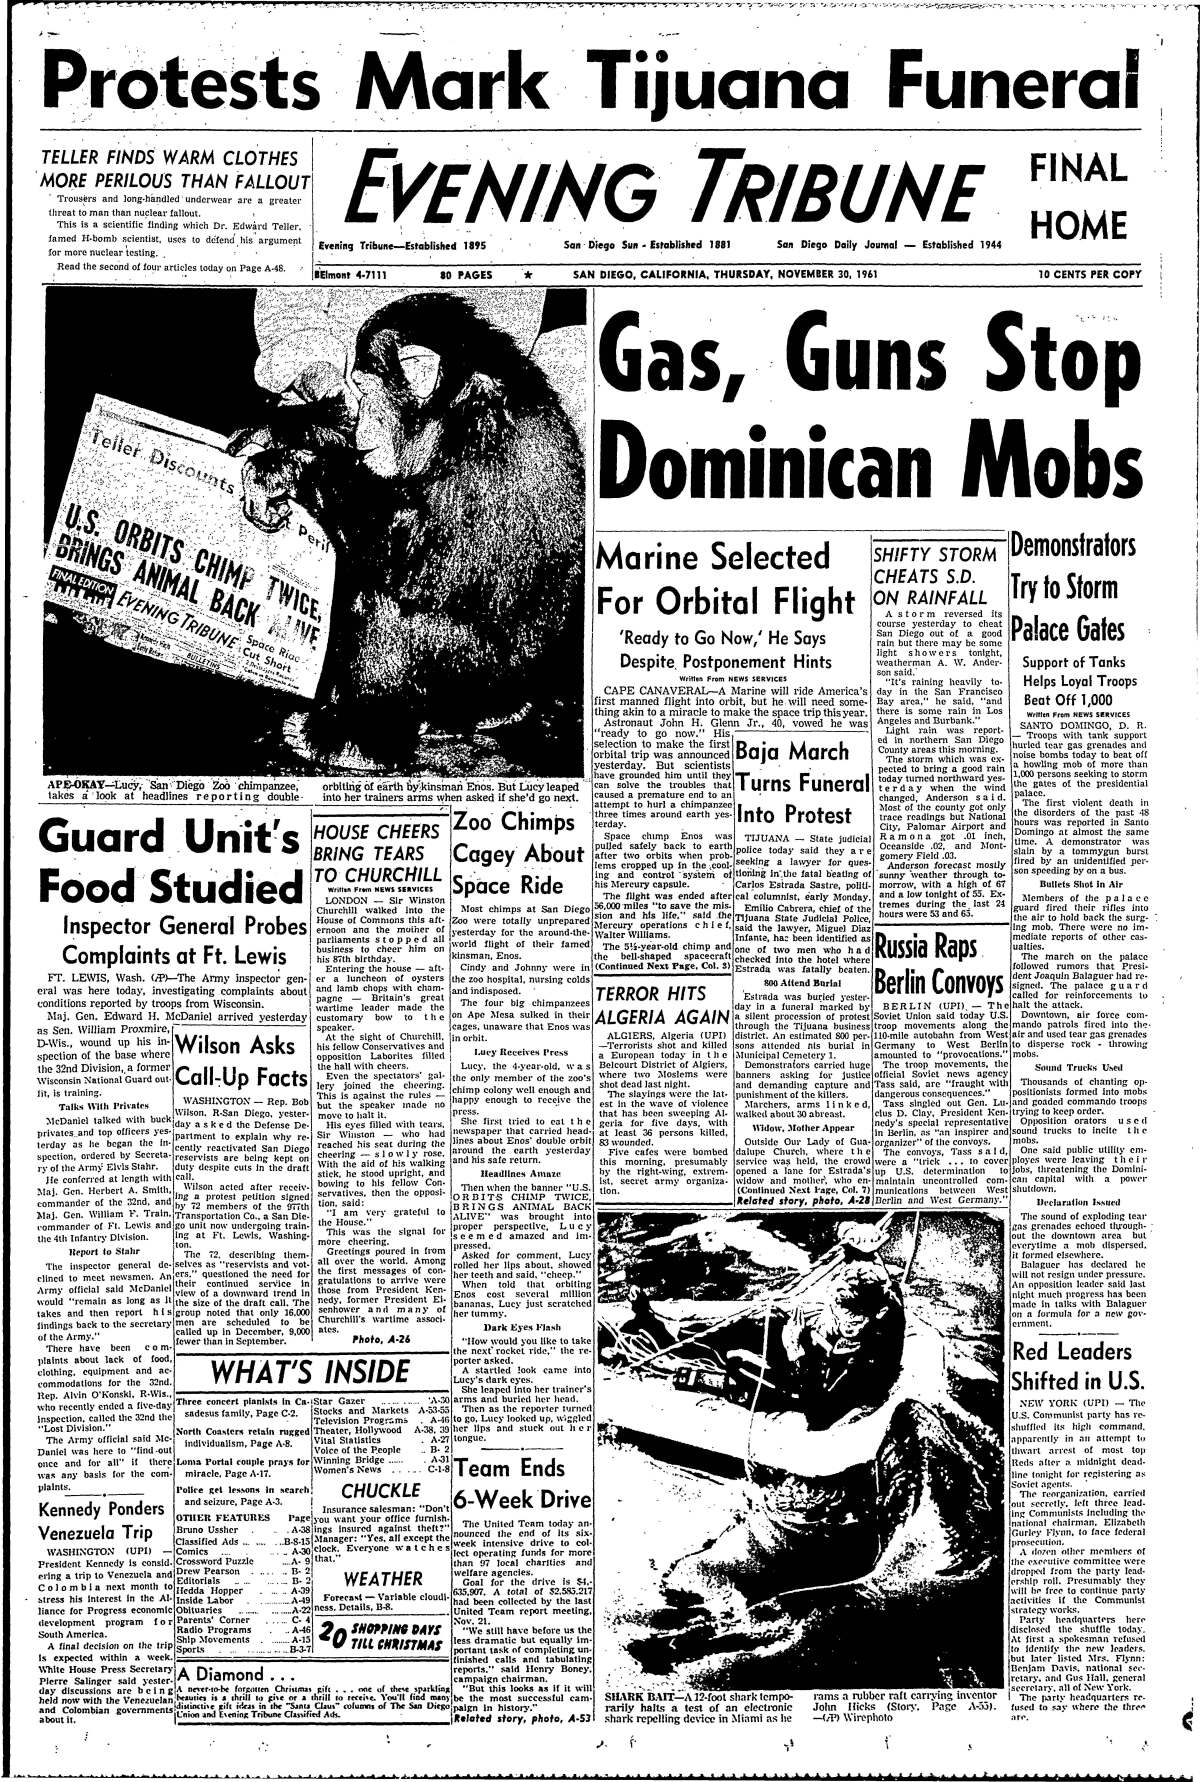 "Zoo Chimps Cagey About Space Ride," on  front page of the Evening Tribune, Nov. 30, 1961.